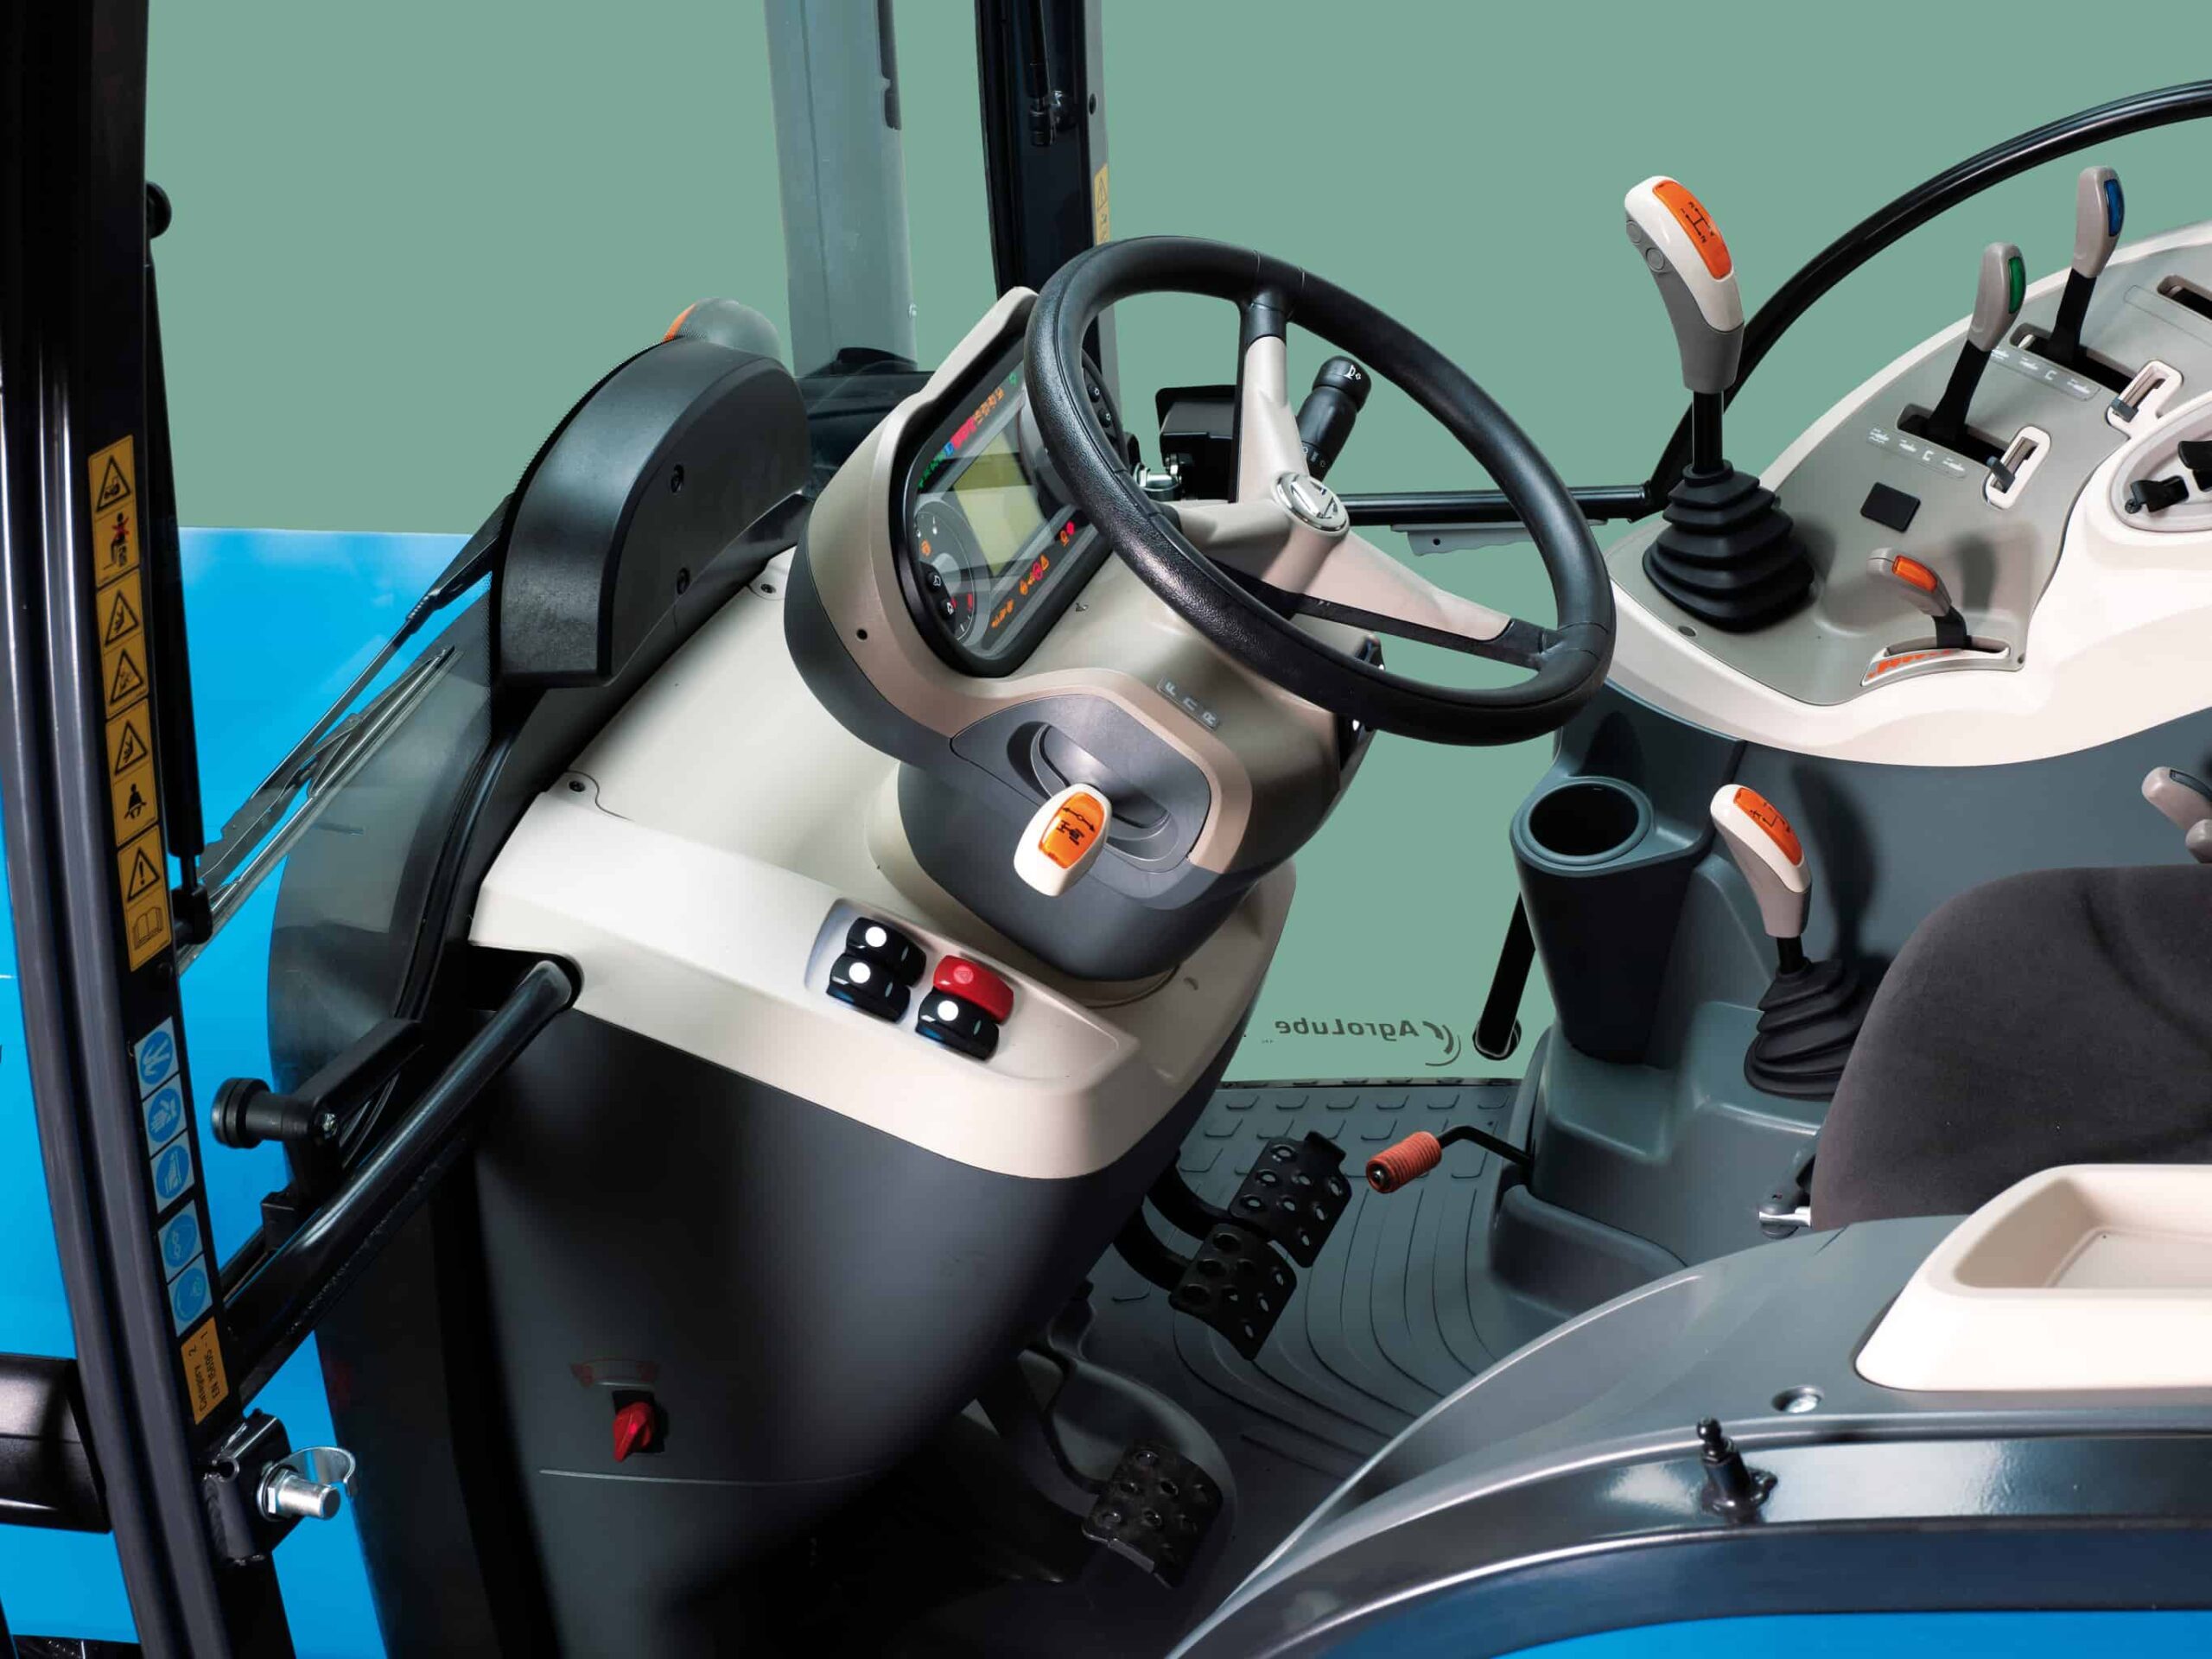 New Landini 5 Series ‘stockman’ tractors introduced for field and yard work